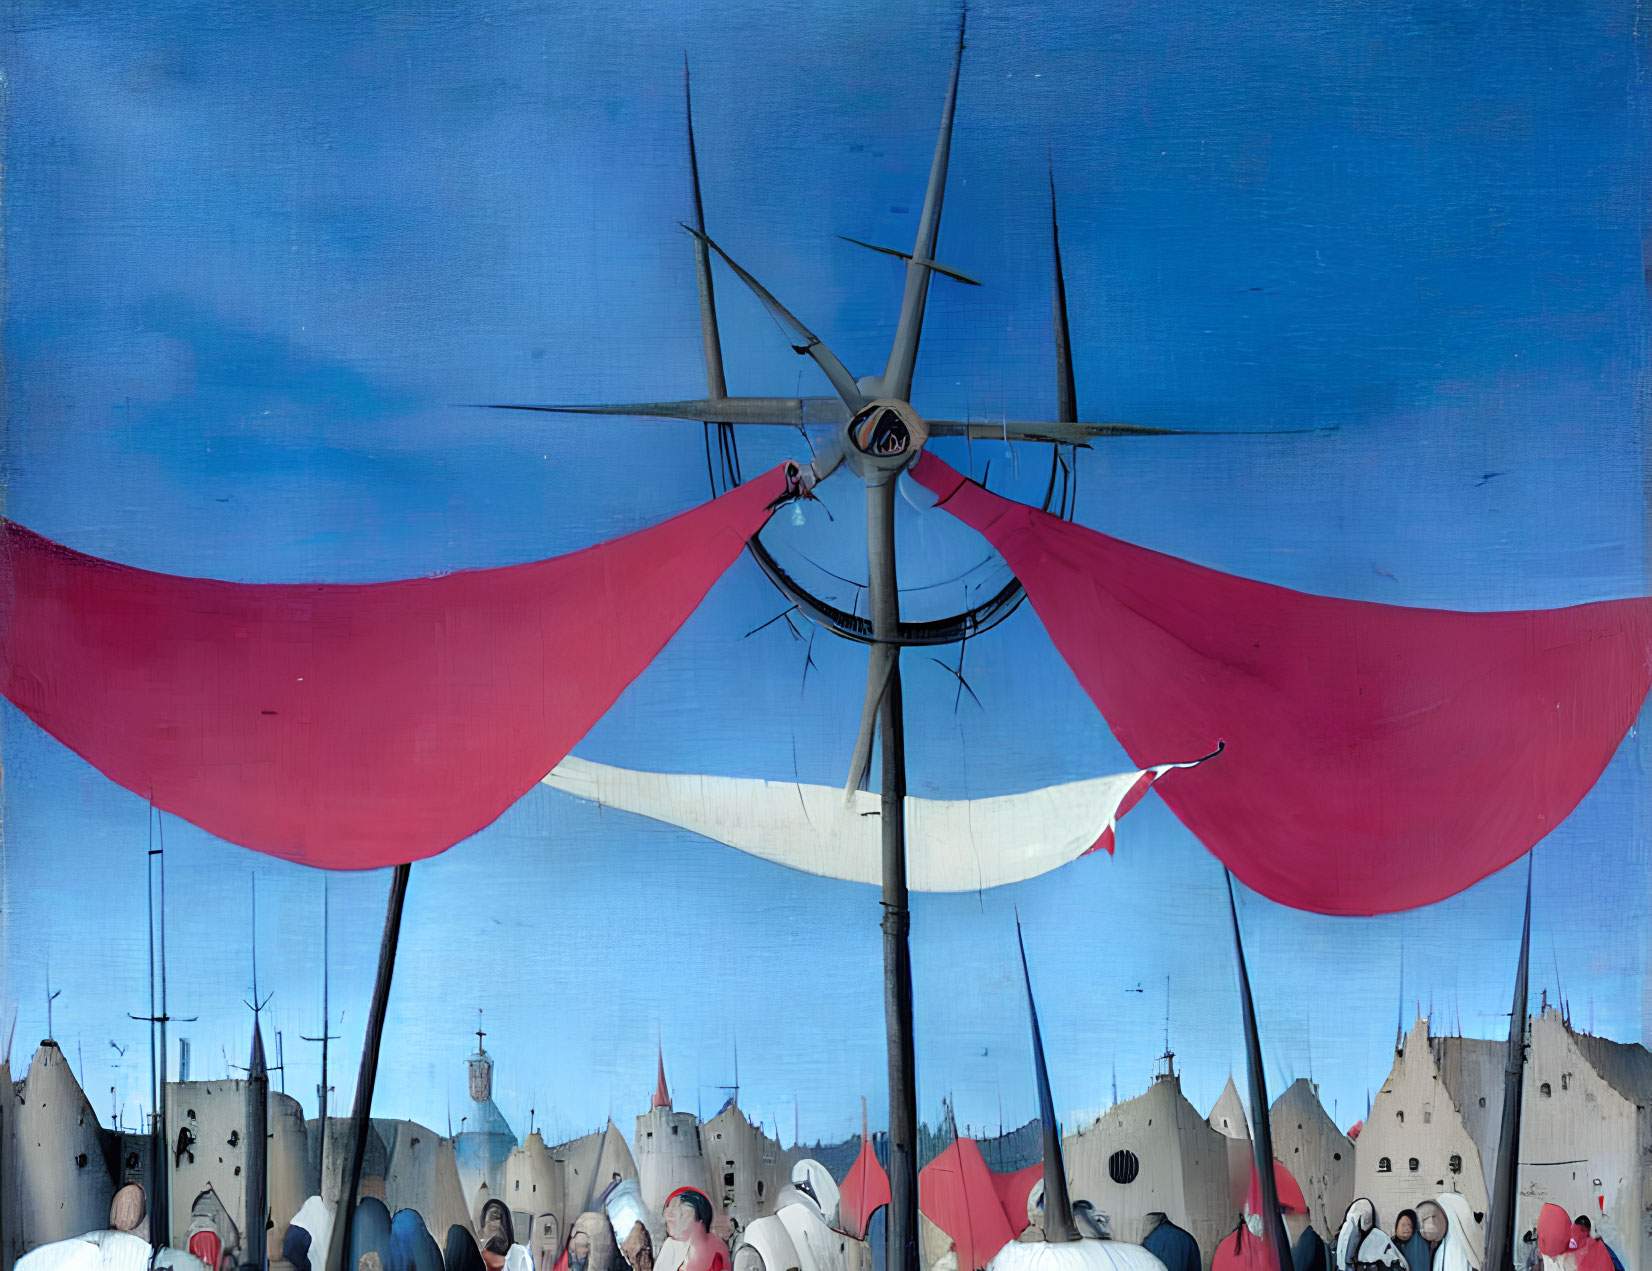 Medieval tent spires with white and red fabric banners under blue sky